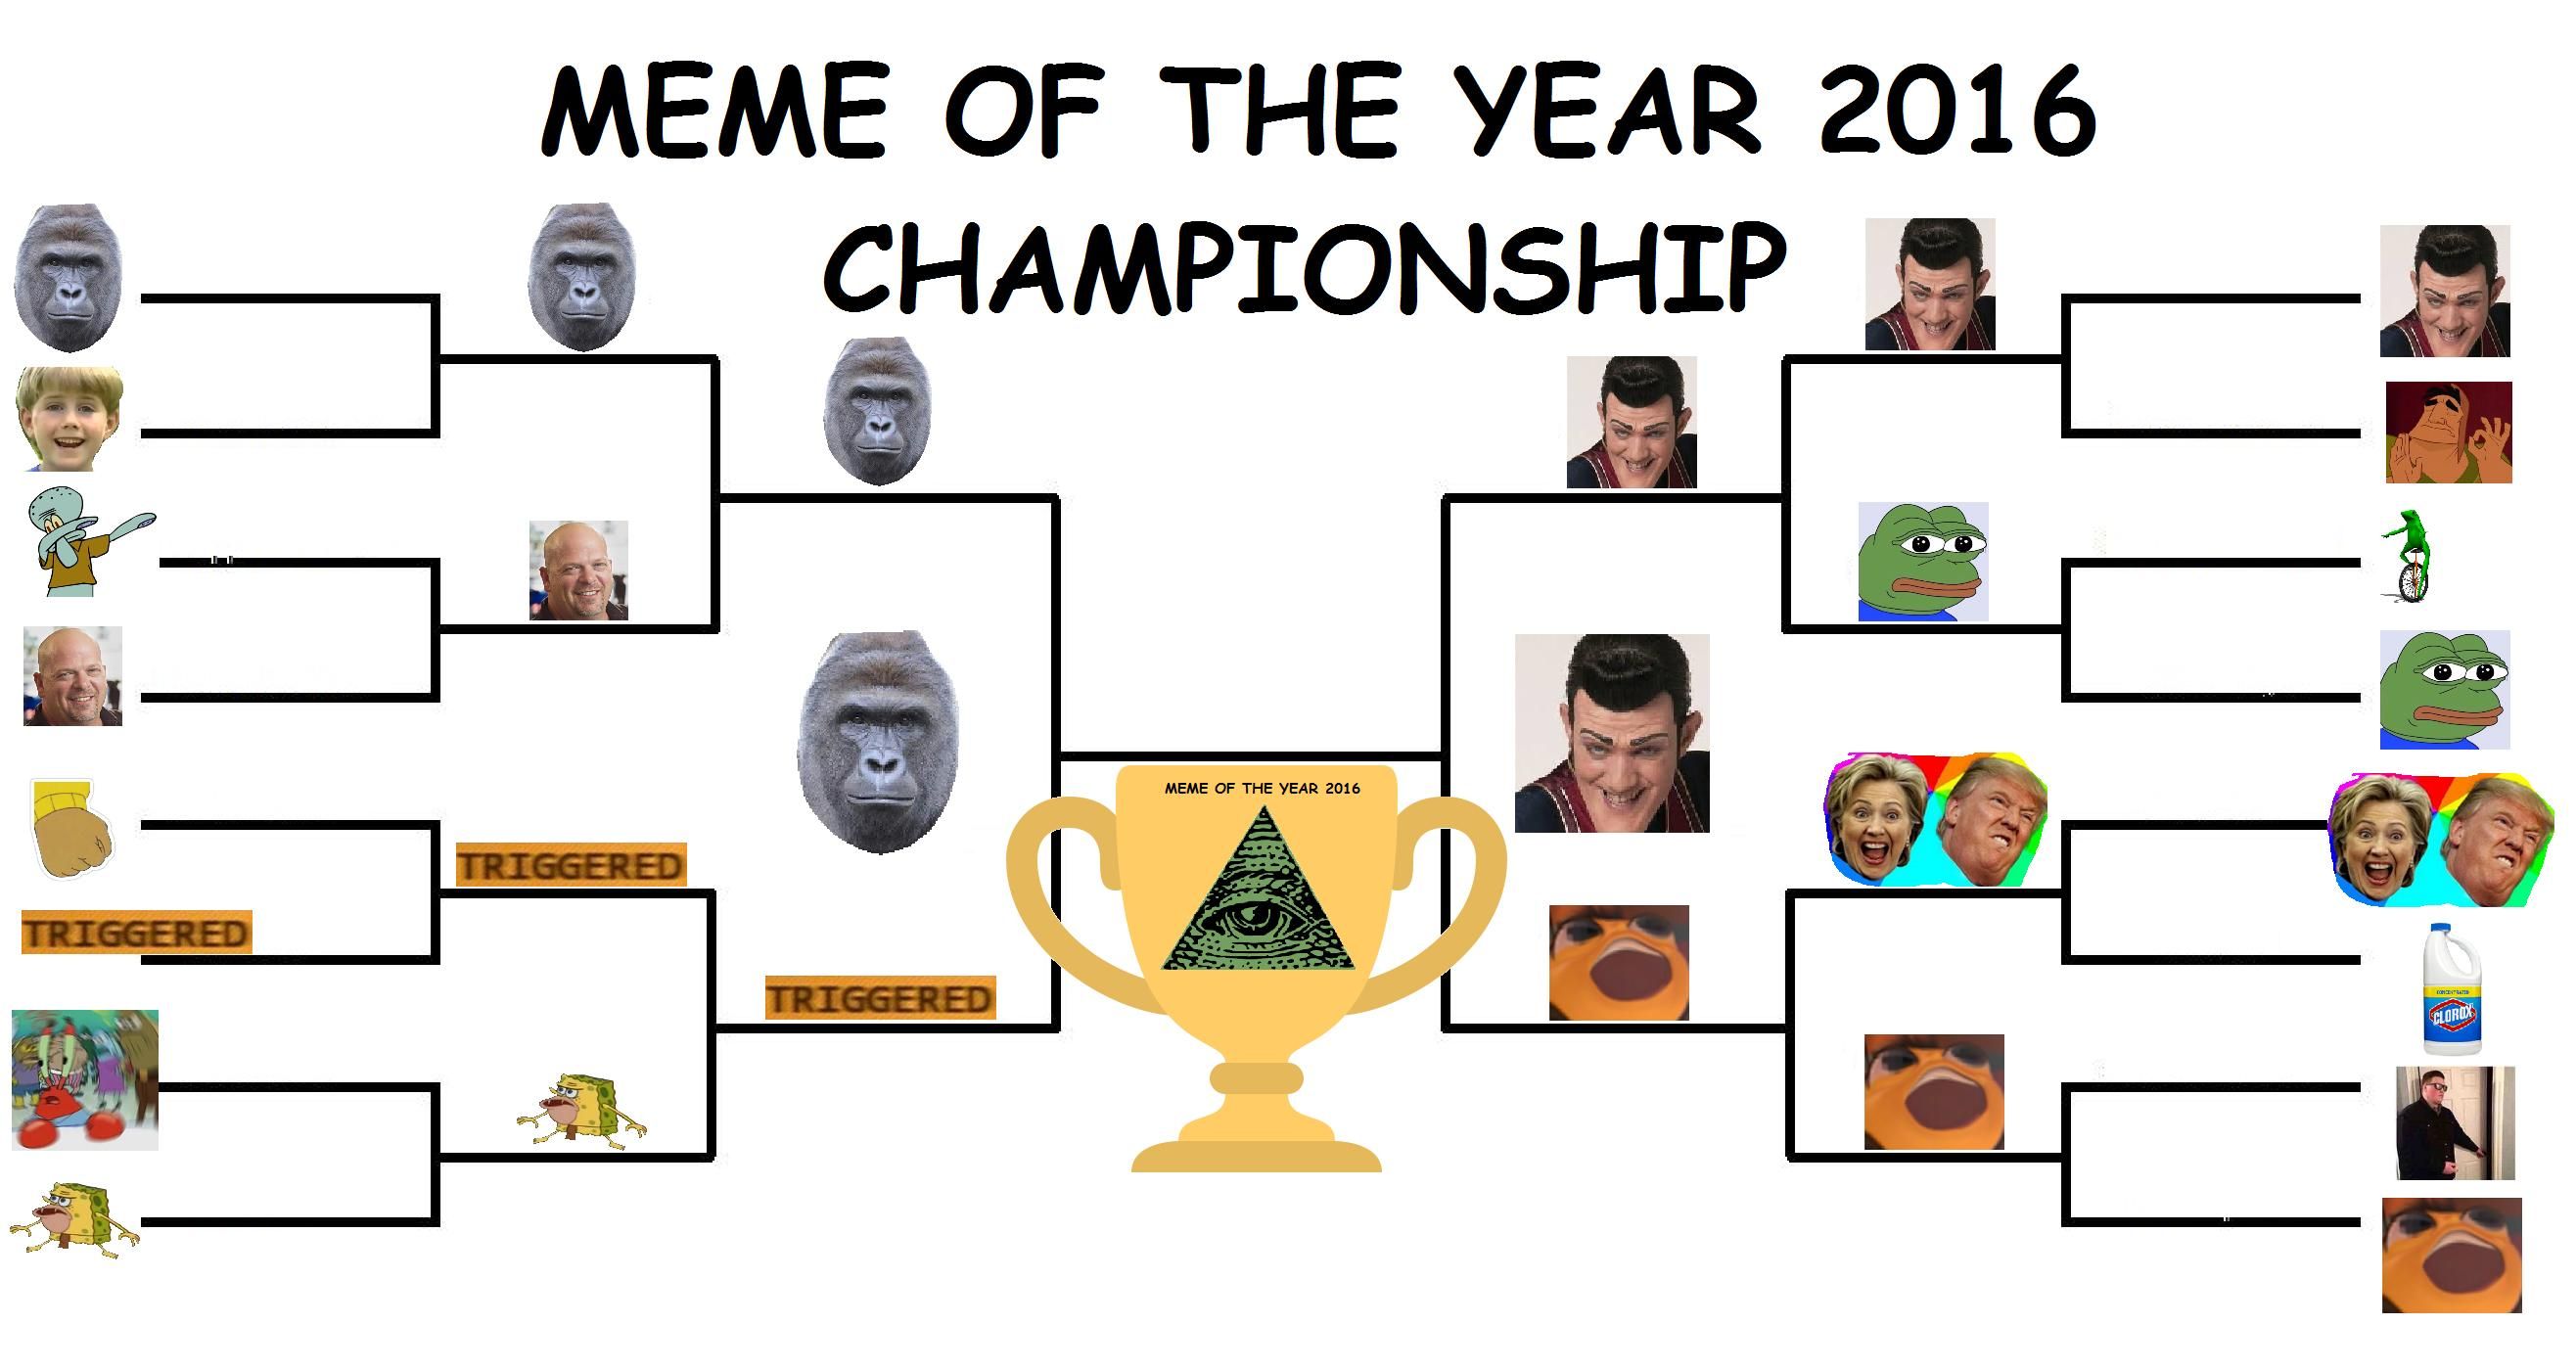 Comment Who Should Win This Years Meme Games